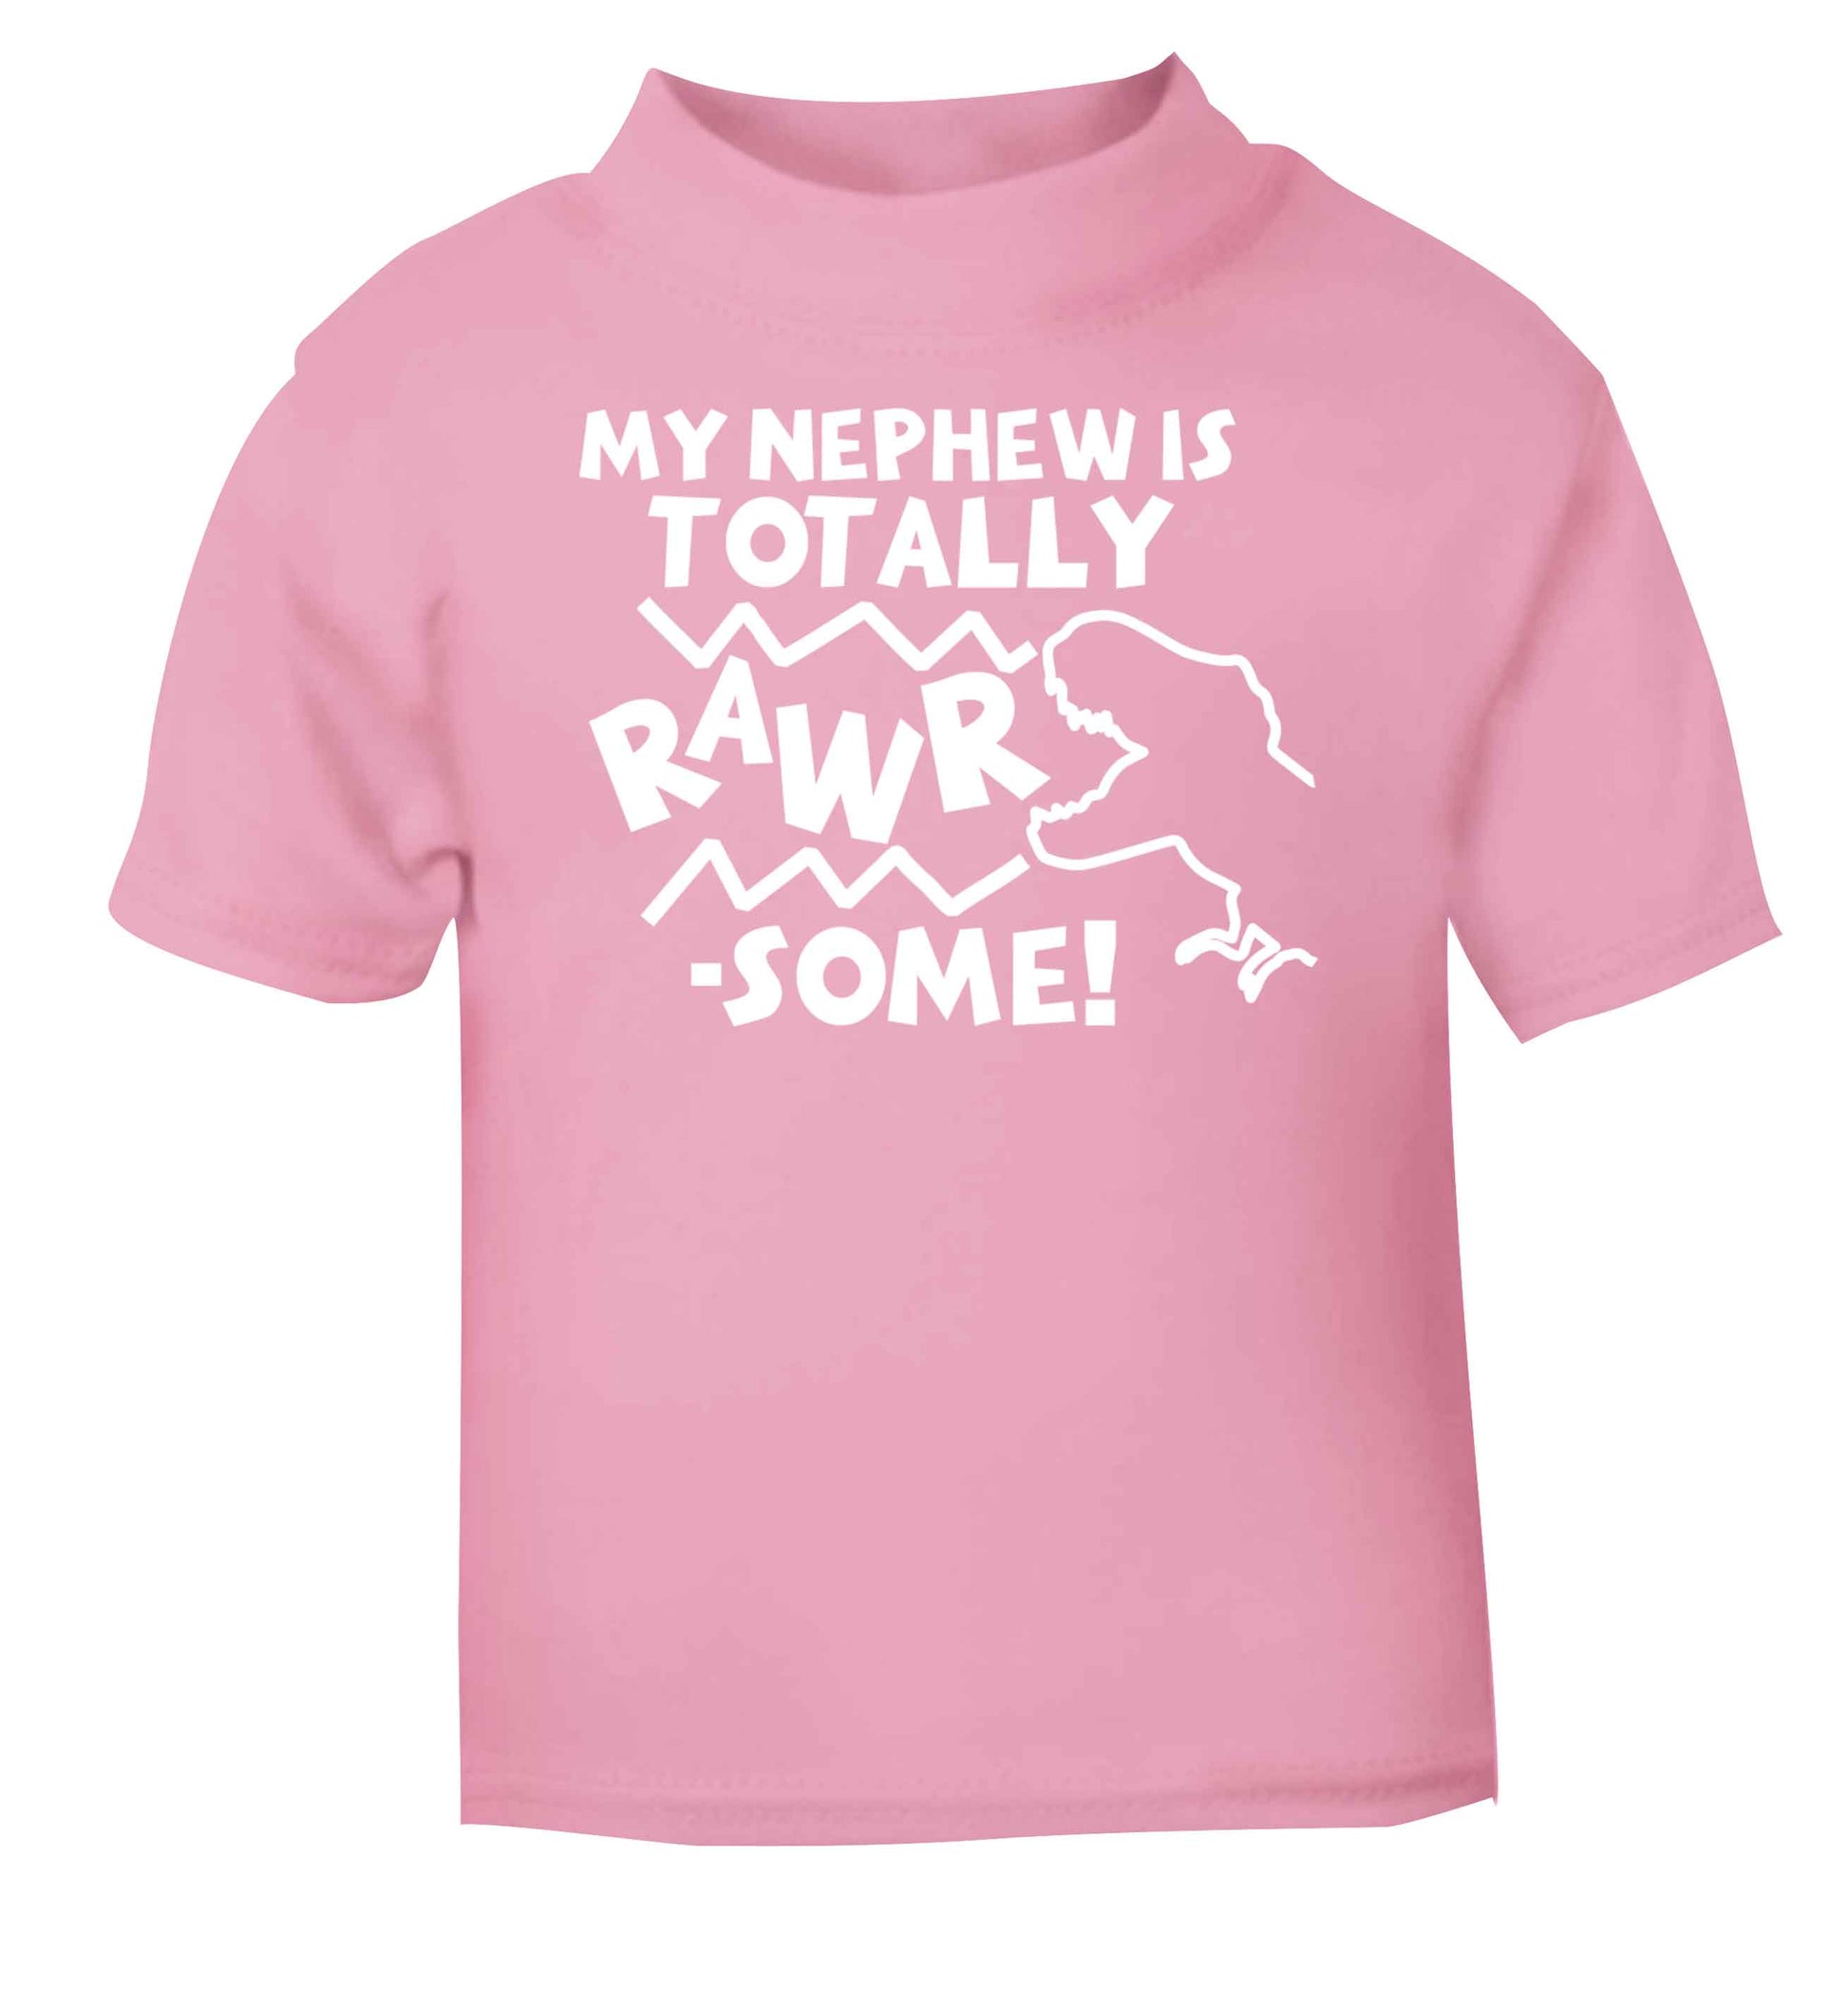 My nephew is totally rawrsome light pink baby toddler Tshirt 2 Years